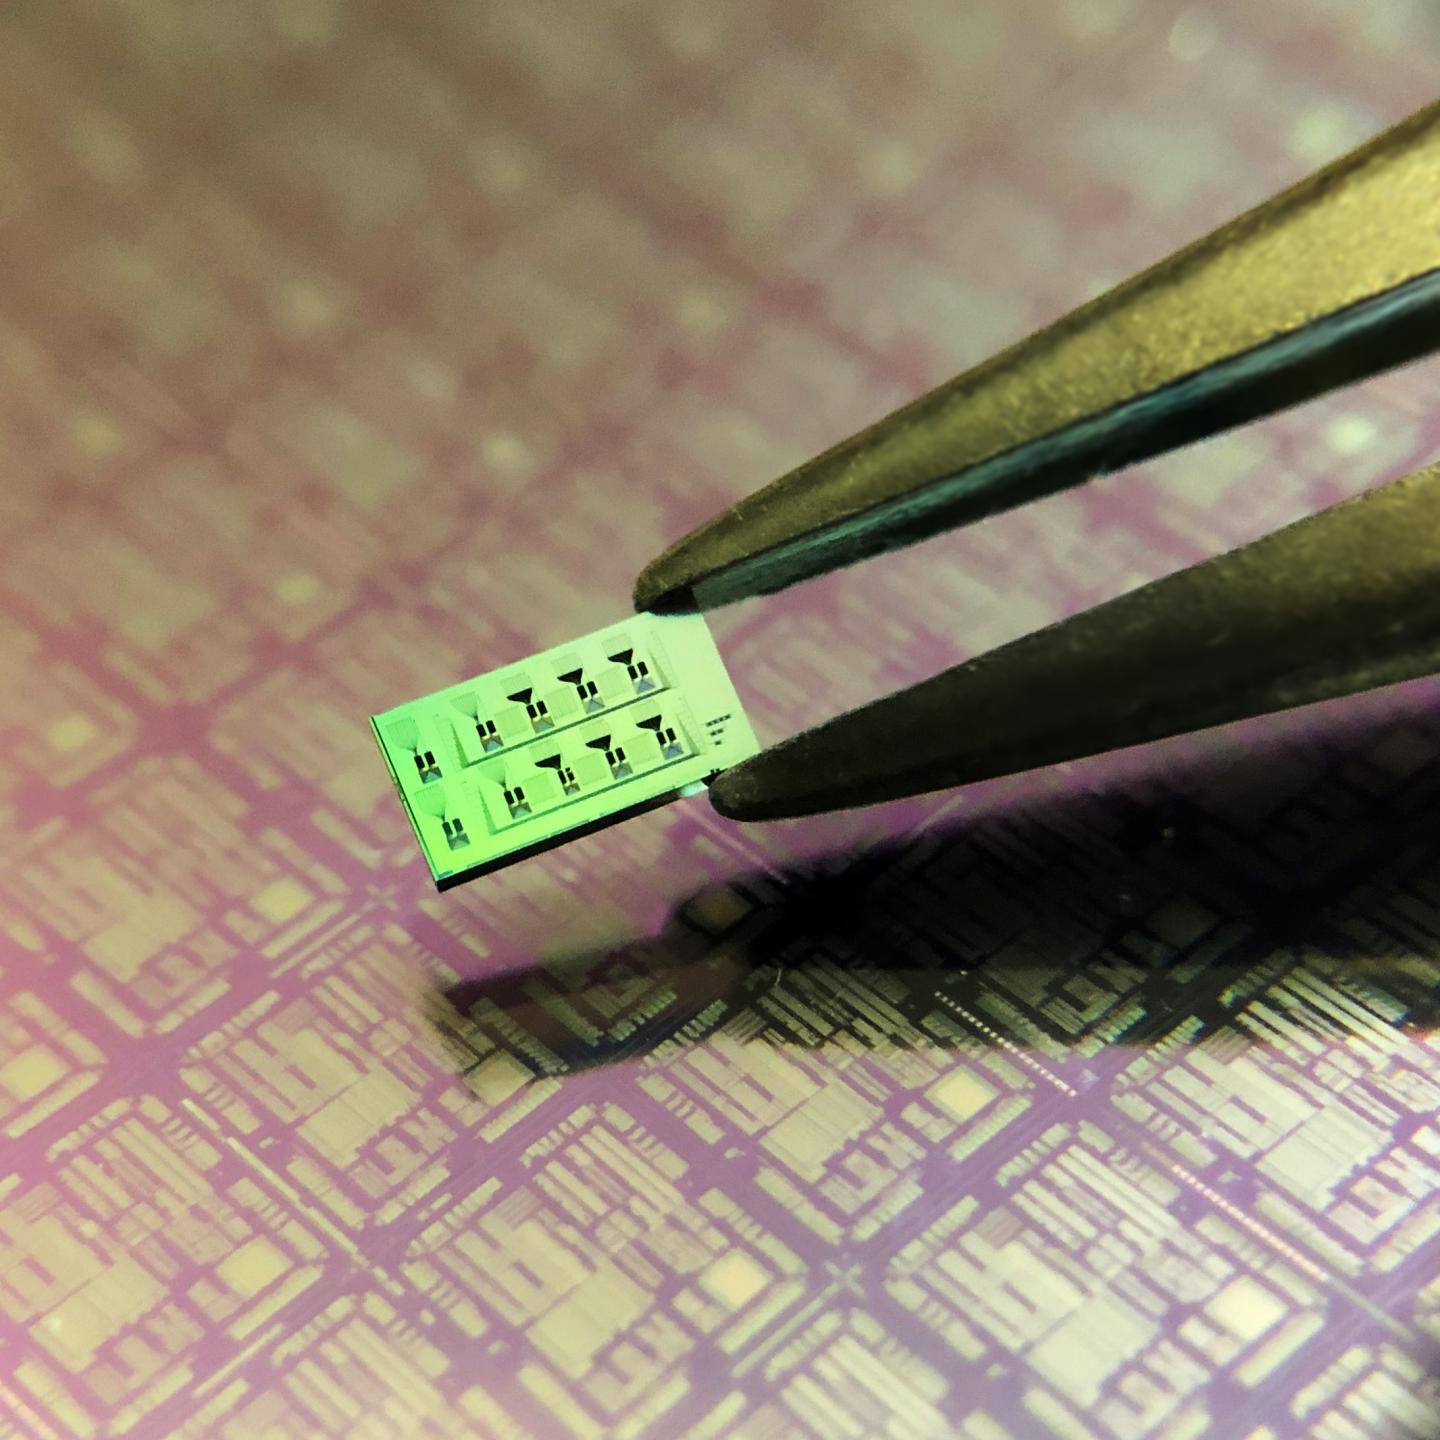 Silicon chip with multiple detectors